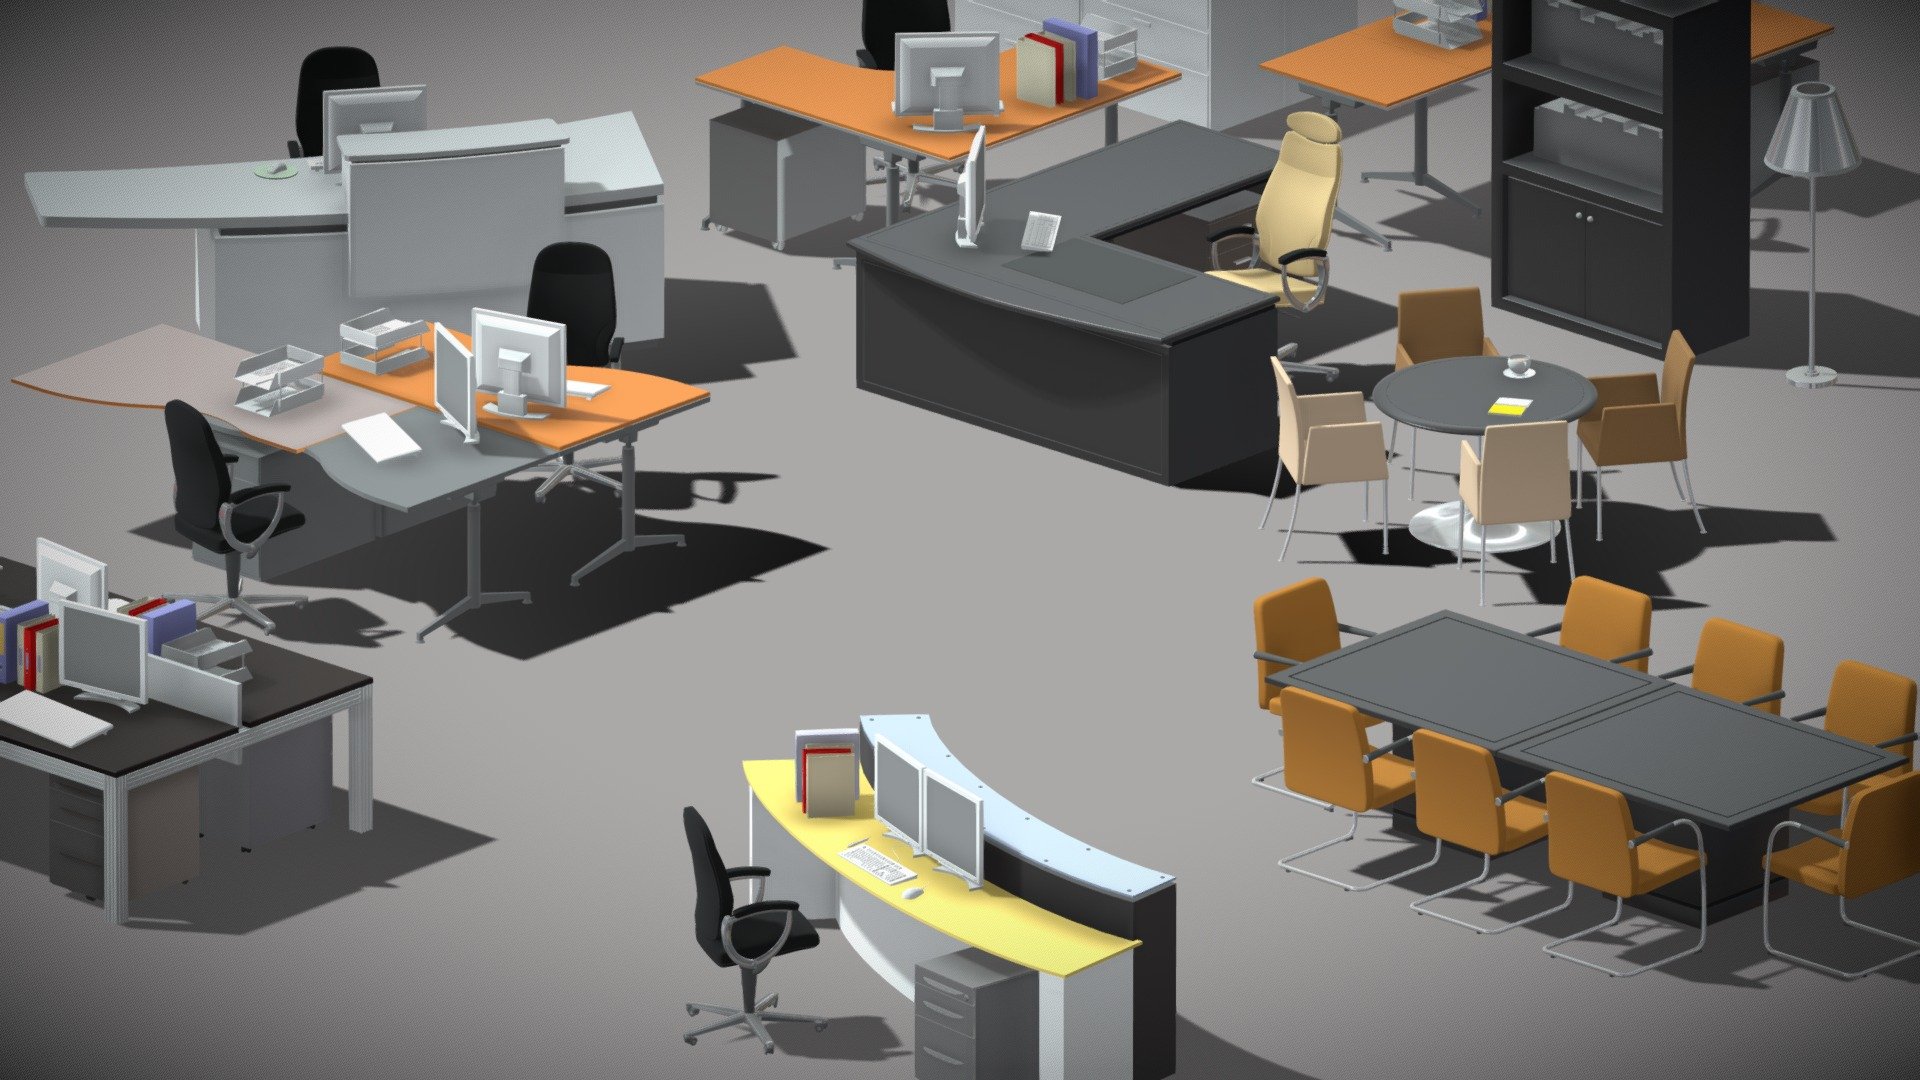 This set includes;
2 reception desks
1 large meeting set
1 small meeting set
1 soft seating settee
1 directors desk set
1 floor lamp
1 table lamp
1 cluster of 2 workstations
2 single workstations
1 4 cluster bench workstation
Accessories are also included 3d model